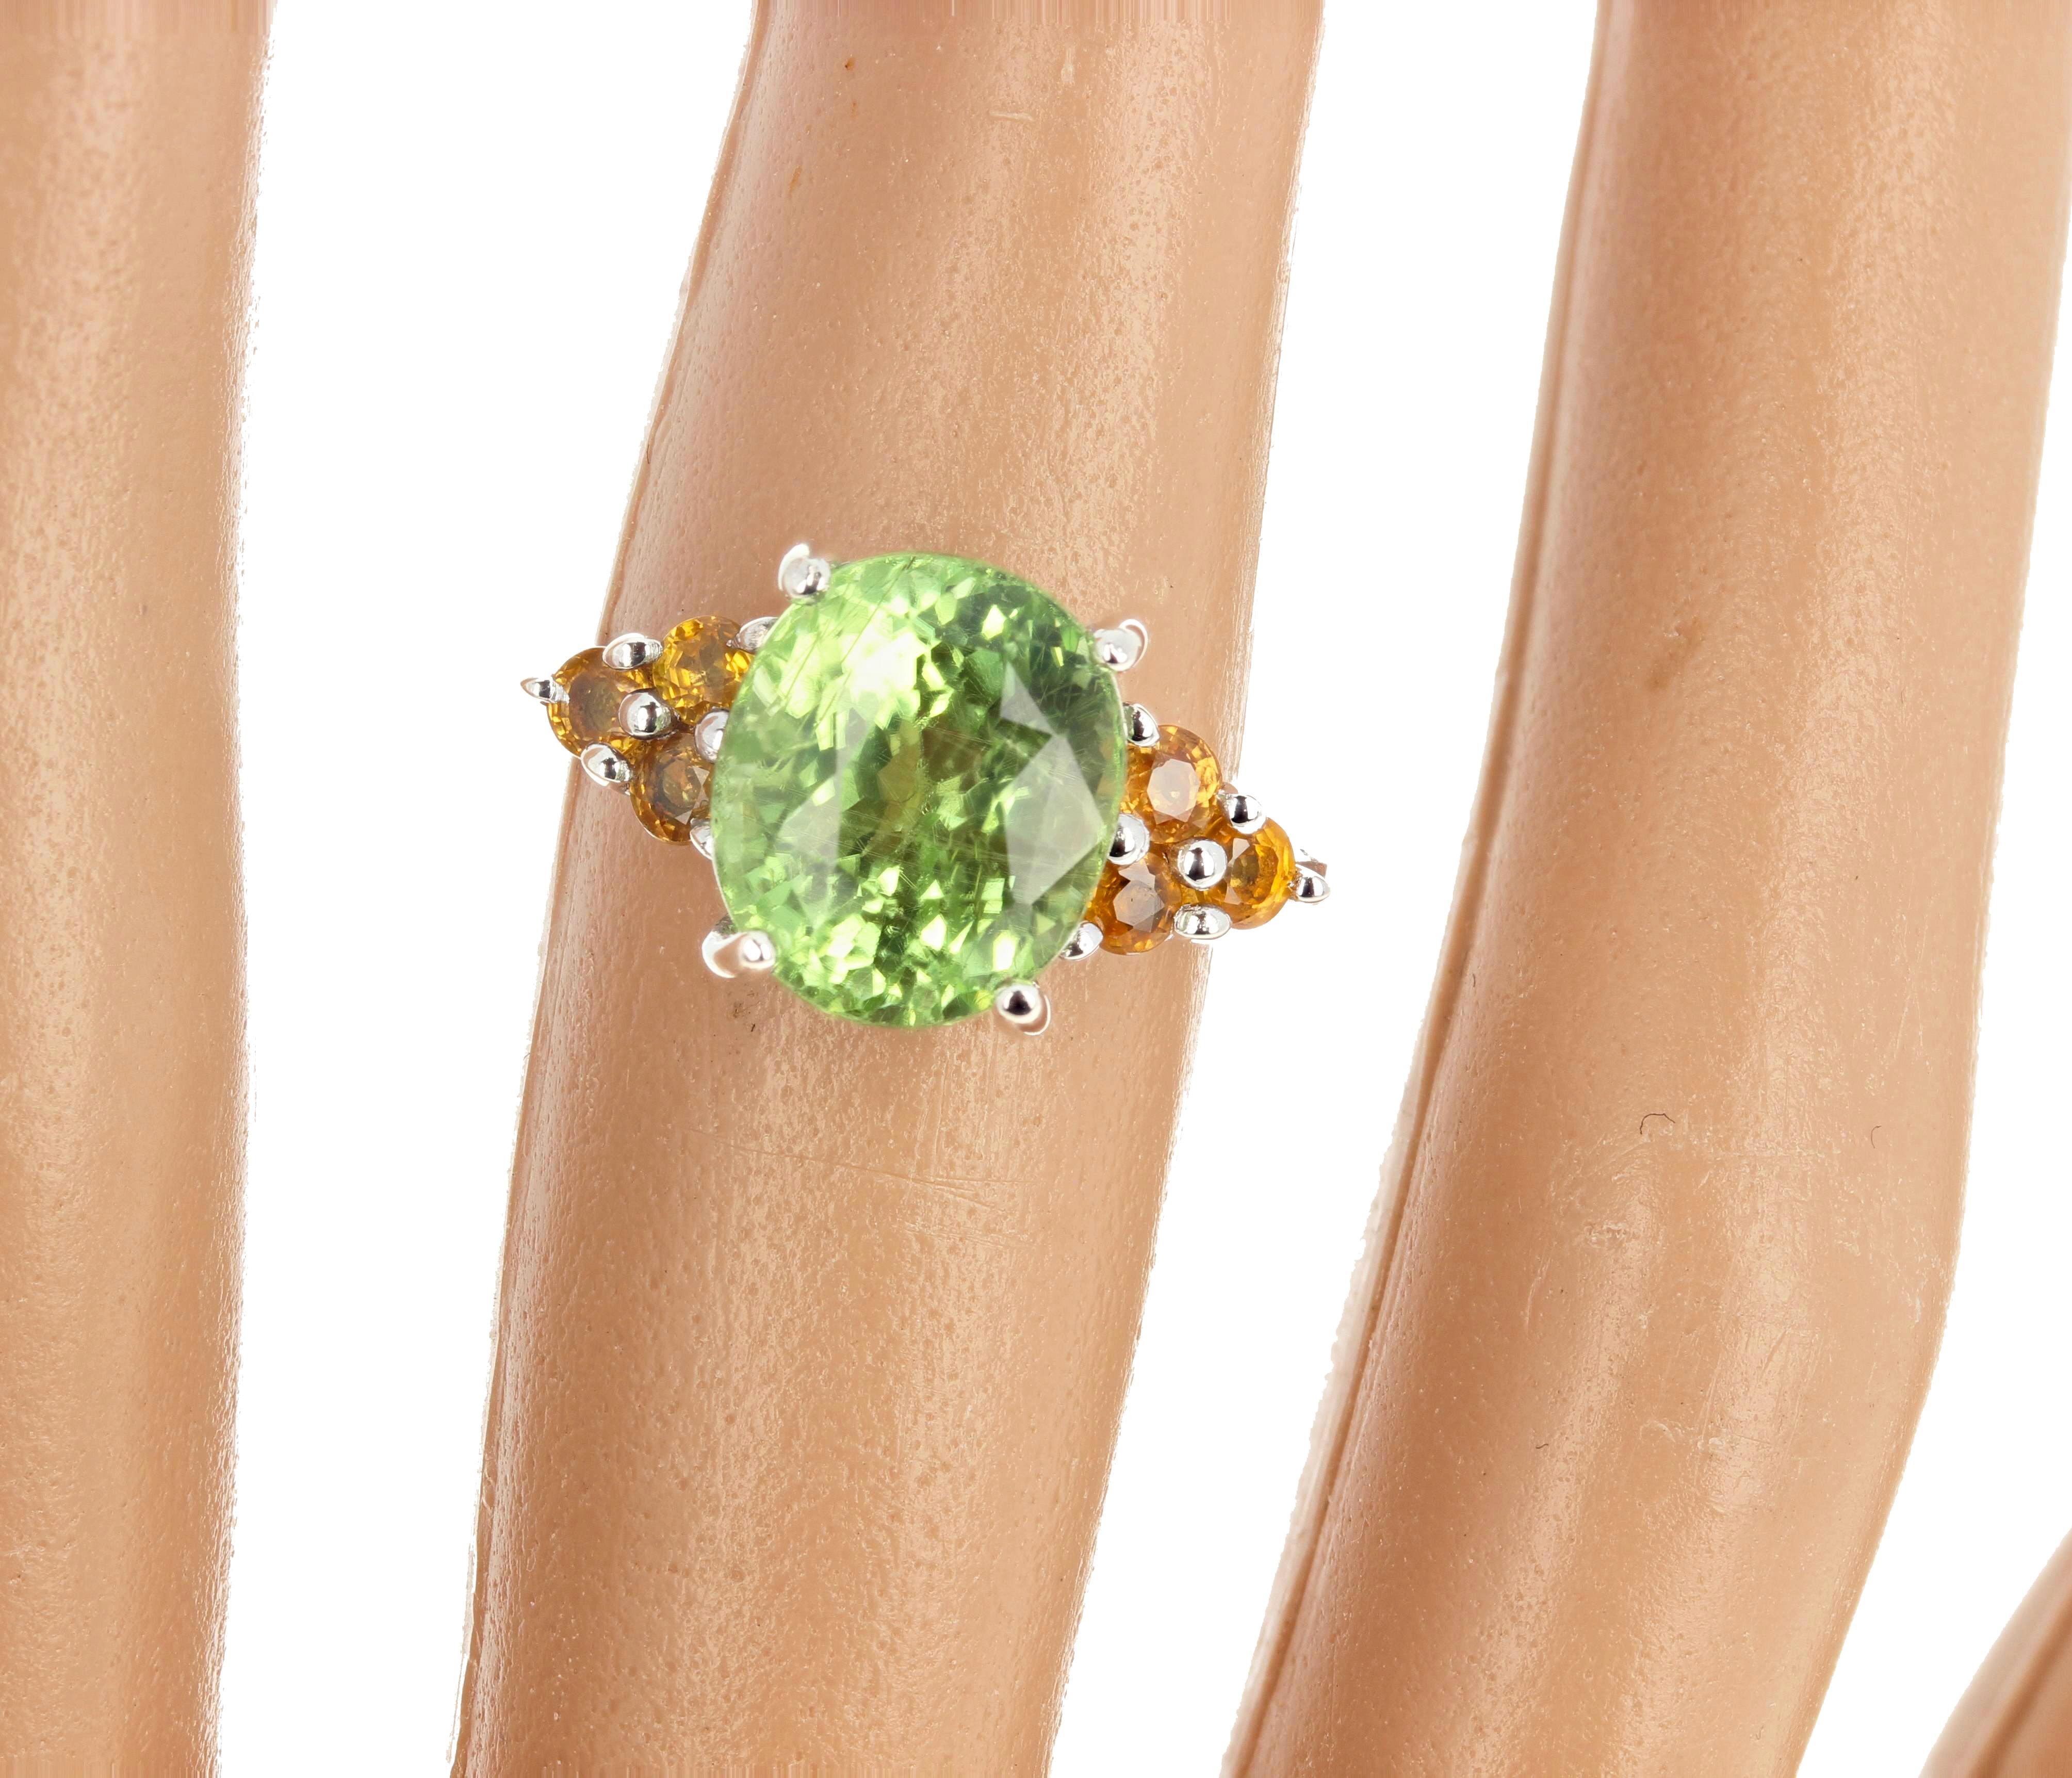 Glittering 5.54 carat natural green Tourmaline (11 mm x 9 mm) enhanced with sparkling little bright yellow Citrines set in a sterling silver ring size 7 1/4 (sizable for free).  There are NO eye visible inclusions in the Tourmaliine.  This gorgeous